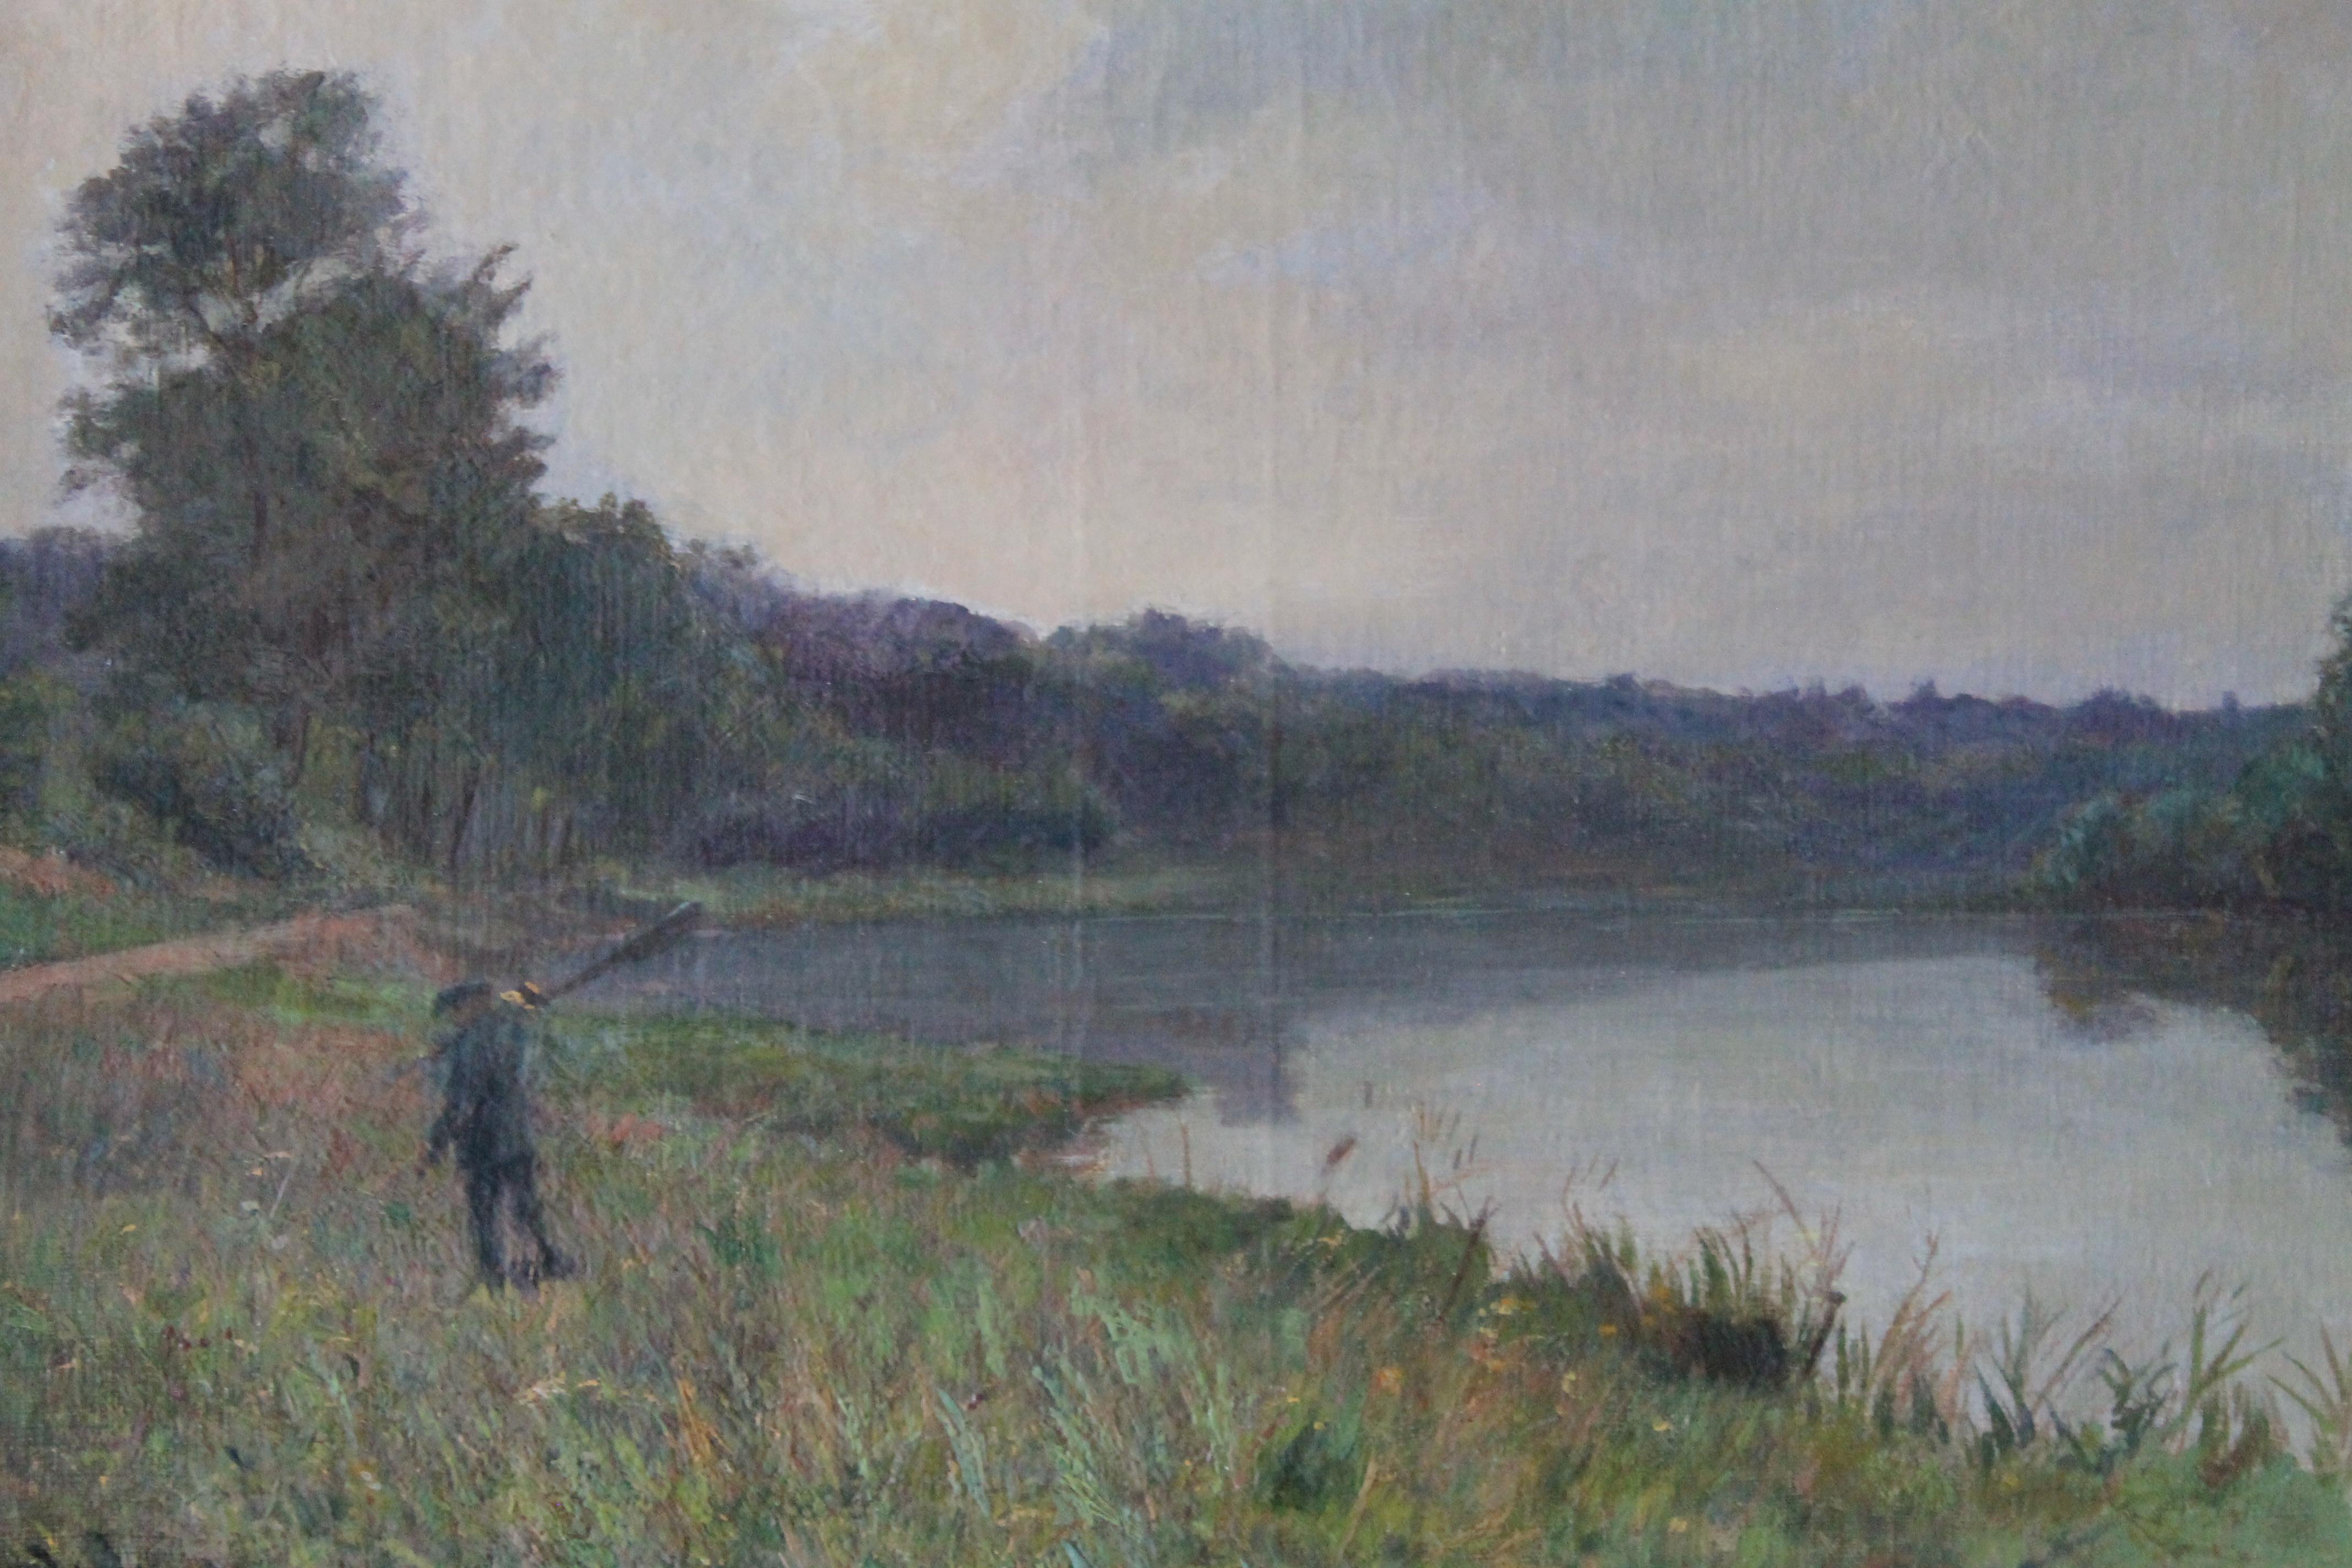 Antique French landscape oil painting by French artist, Jacques L'Huillier.   The silver lilac sky is heavy and ready to give up the last of the day's light.  A man walks through long grass towards the path that will take him home, hopefully to a